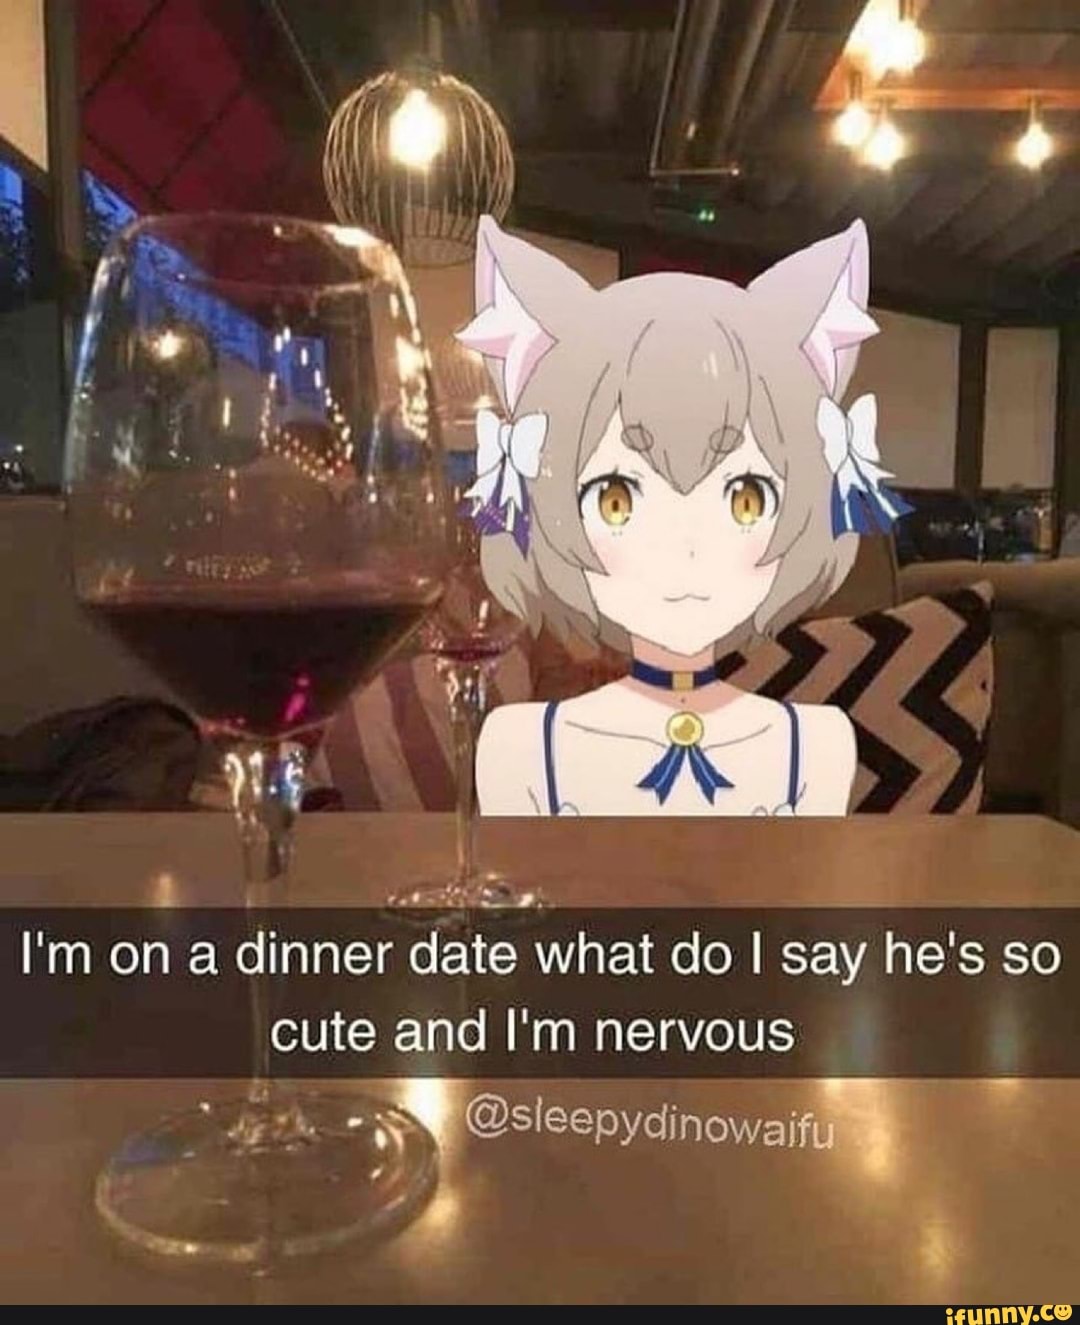 I'm on a dinner date what do I say he's so cute and I'm nerv...